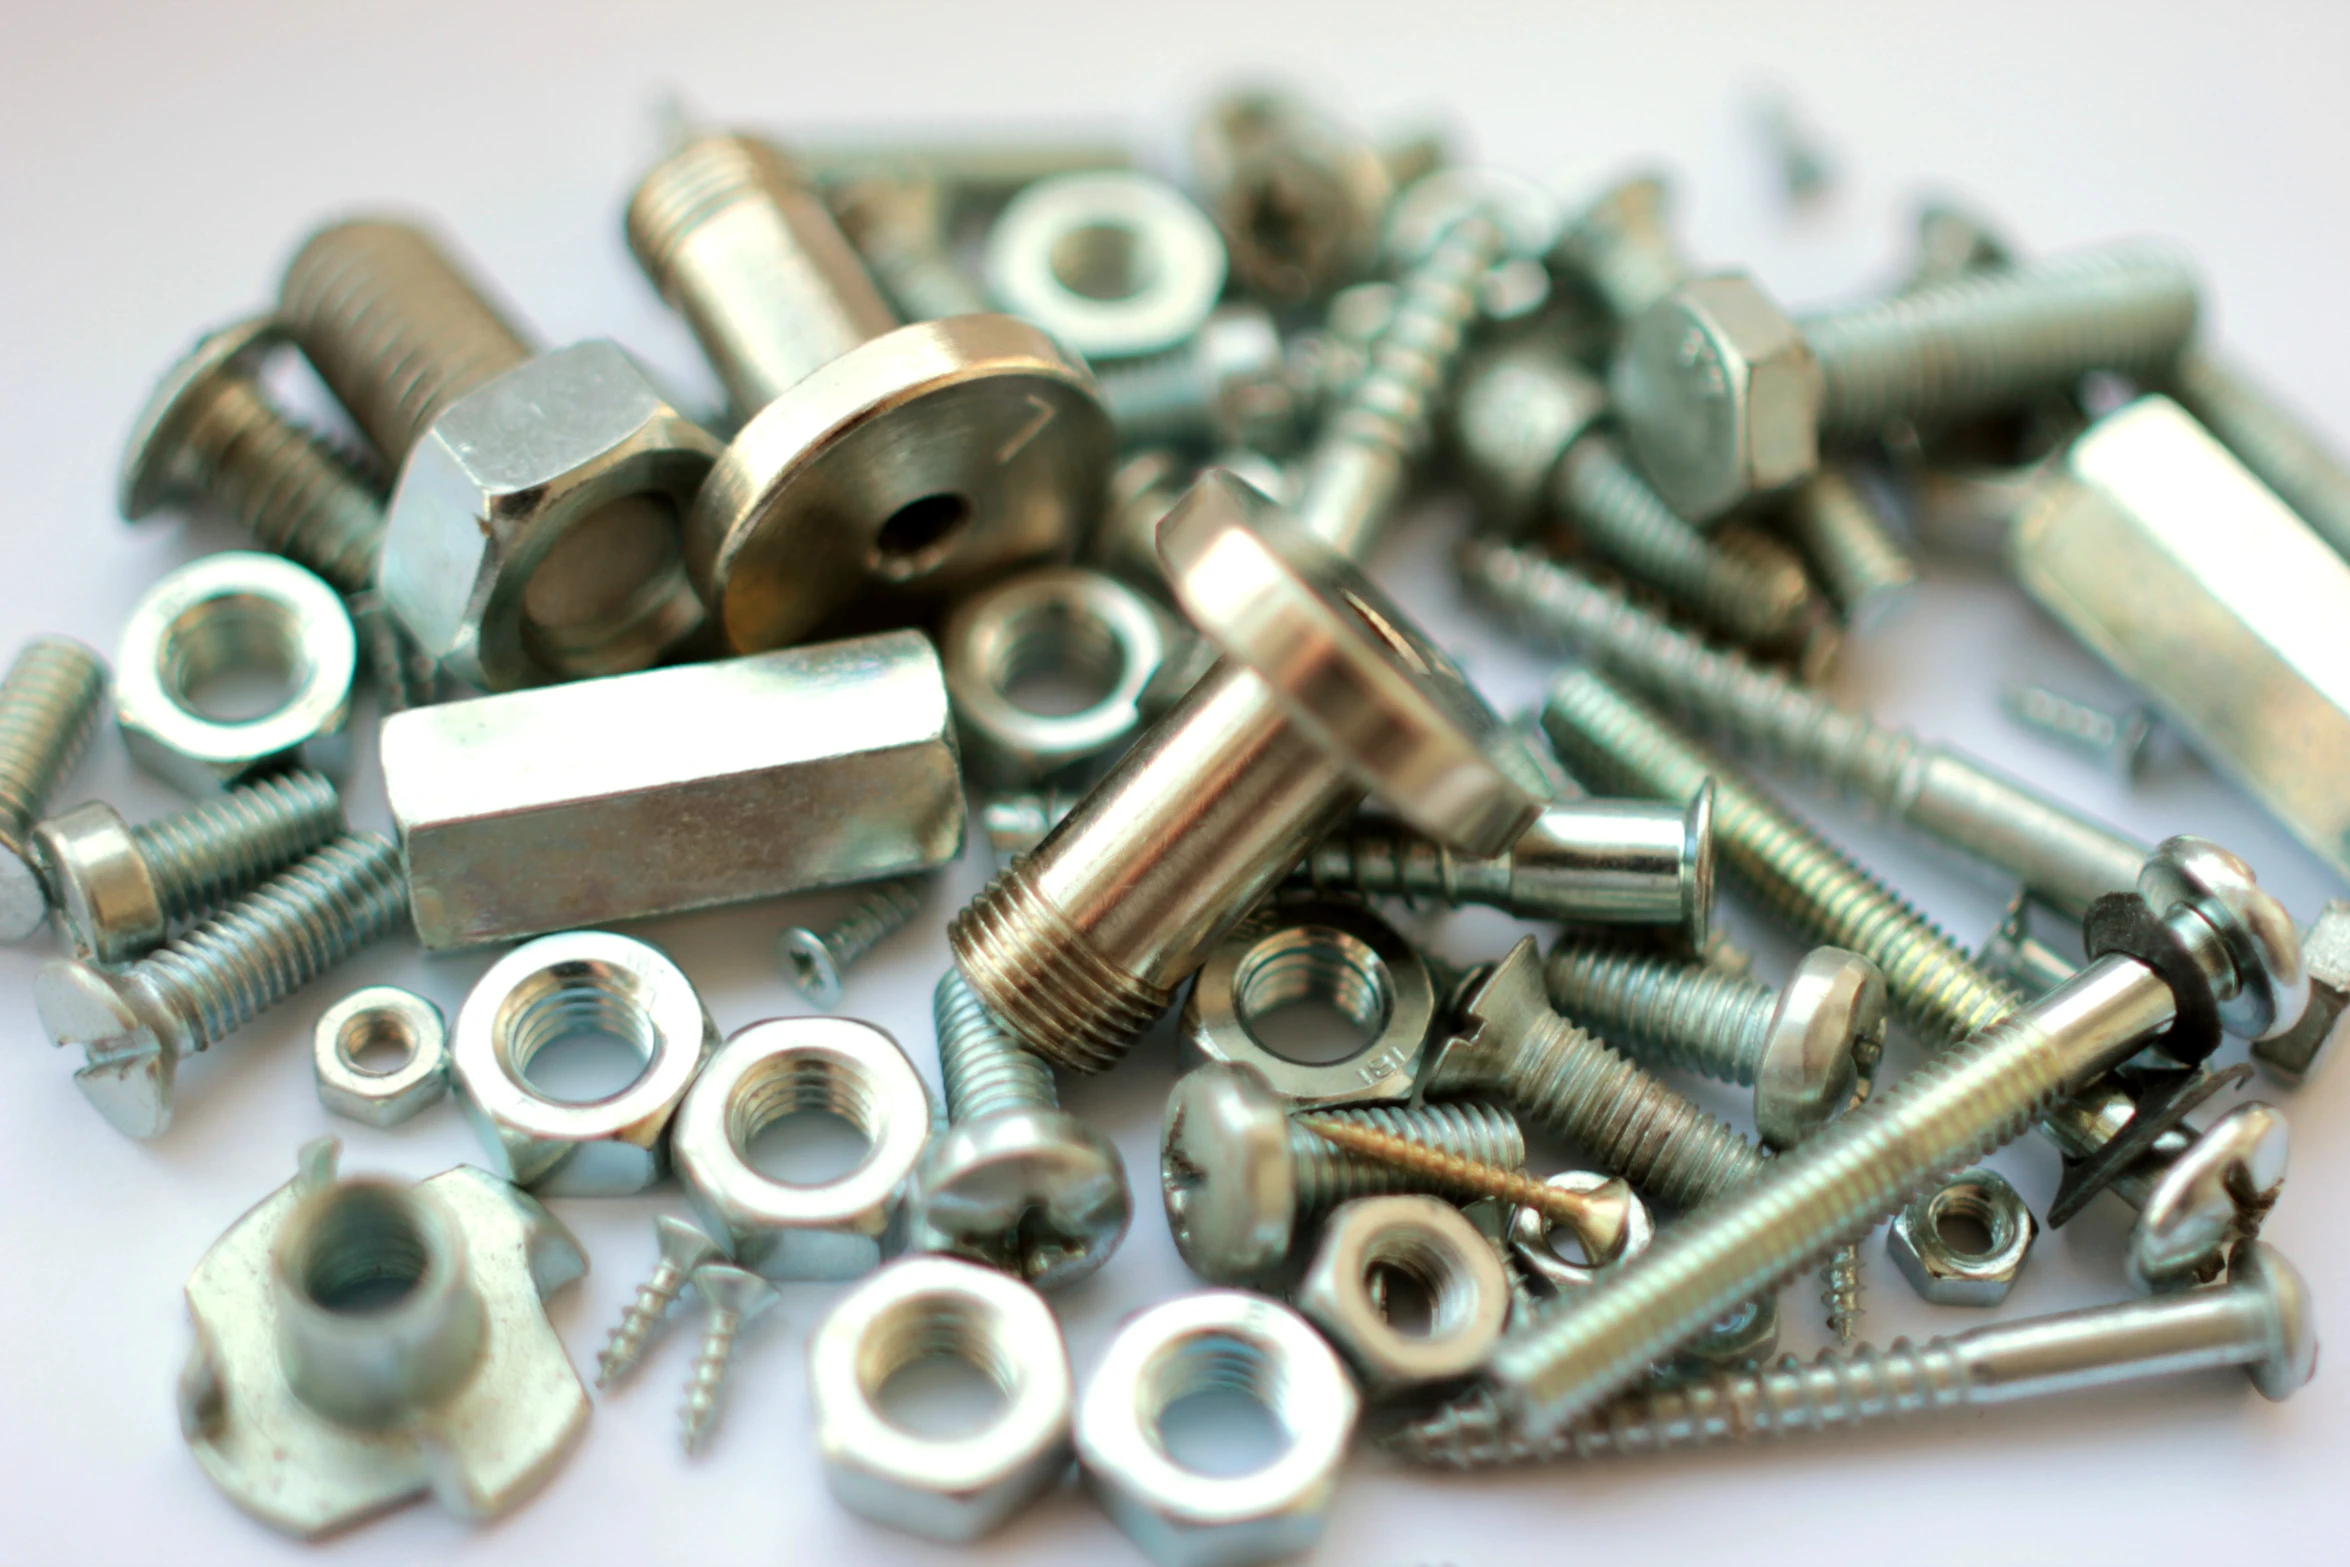 multiple nuts and bolts are piled on each other